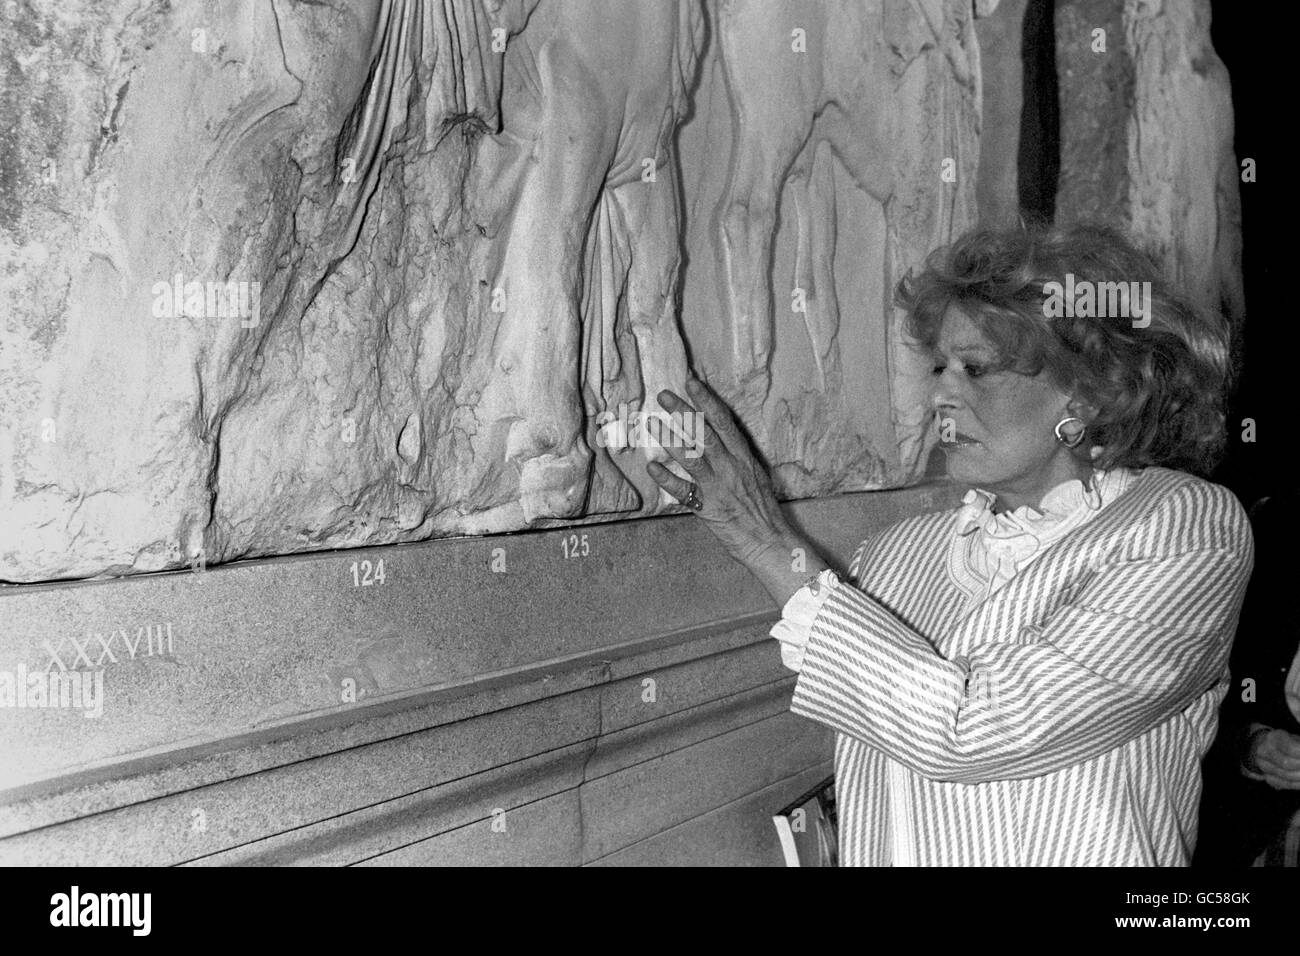 Greek actress Melina Mercouri, who is Greek Minister for Culture and Sciences, touches the Elgin Marbles. She is on a four day visit to London and is visiting the Elgin Marbles shown at the British Museum. The Greek Government intend to make an official request for the return of the marbles. The Elgin Marbles have been at the British Museum since the British government purchased them in 1816. Thomas Bruce, 7th Earl of Elgin, removed many of the marbles from the Parthenon after obtaining a controversial permit from the Ottoman authorities to remove pieces from the Acropolis. Stock Photo